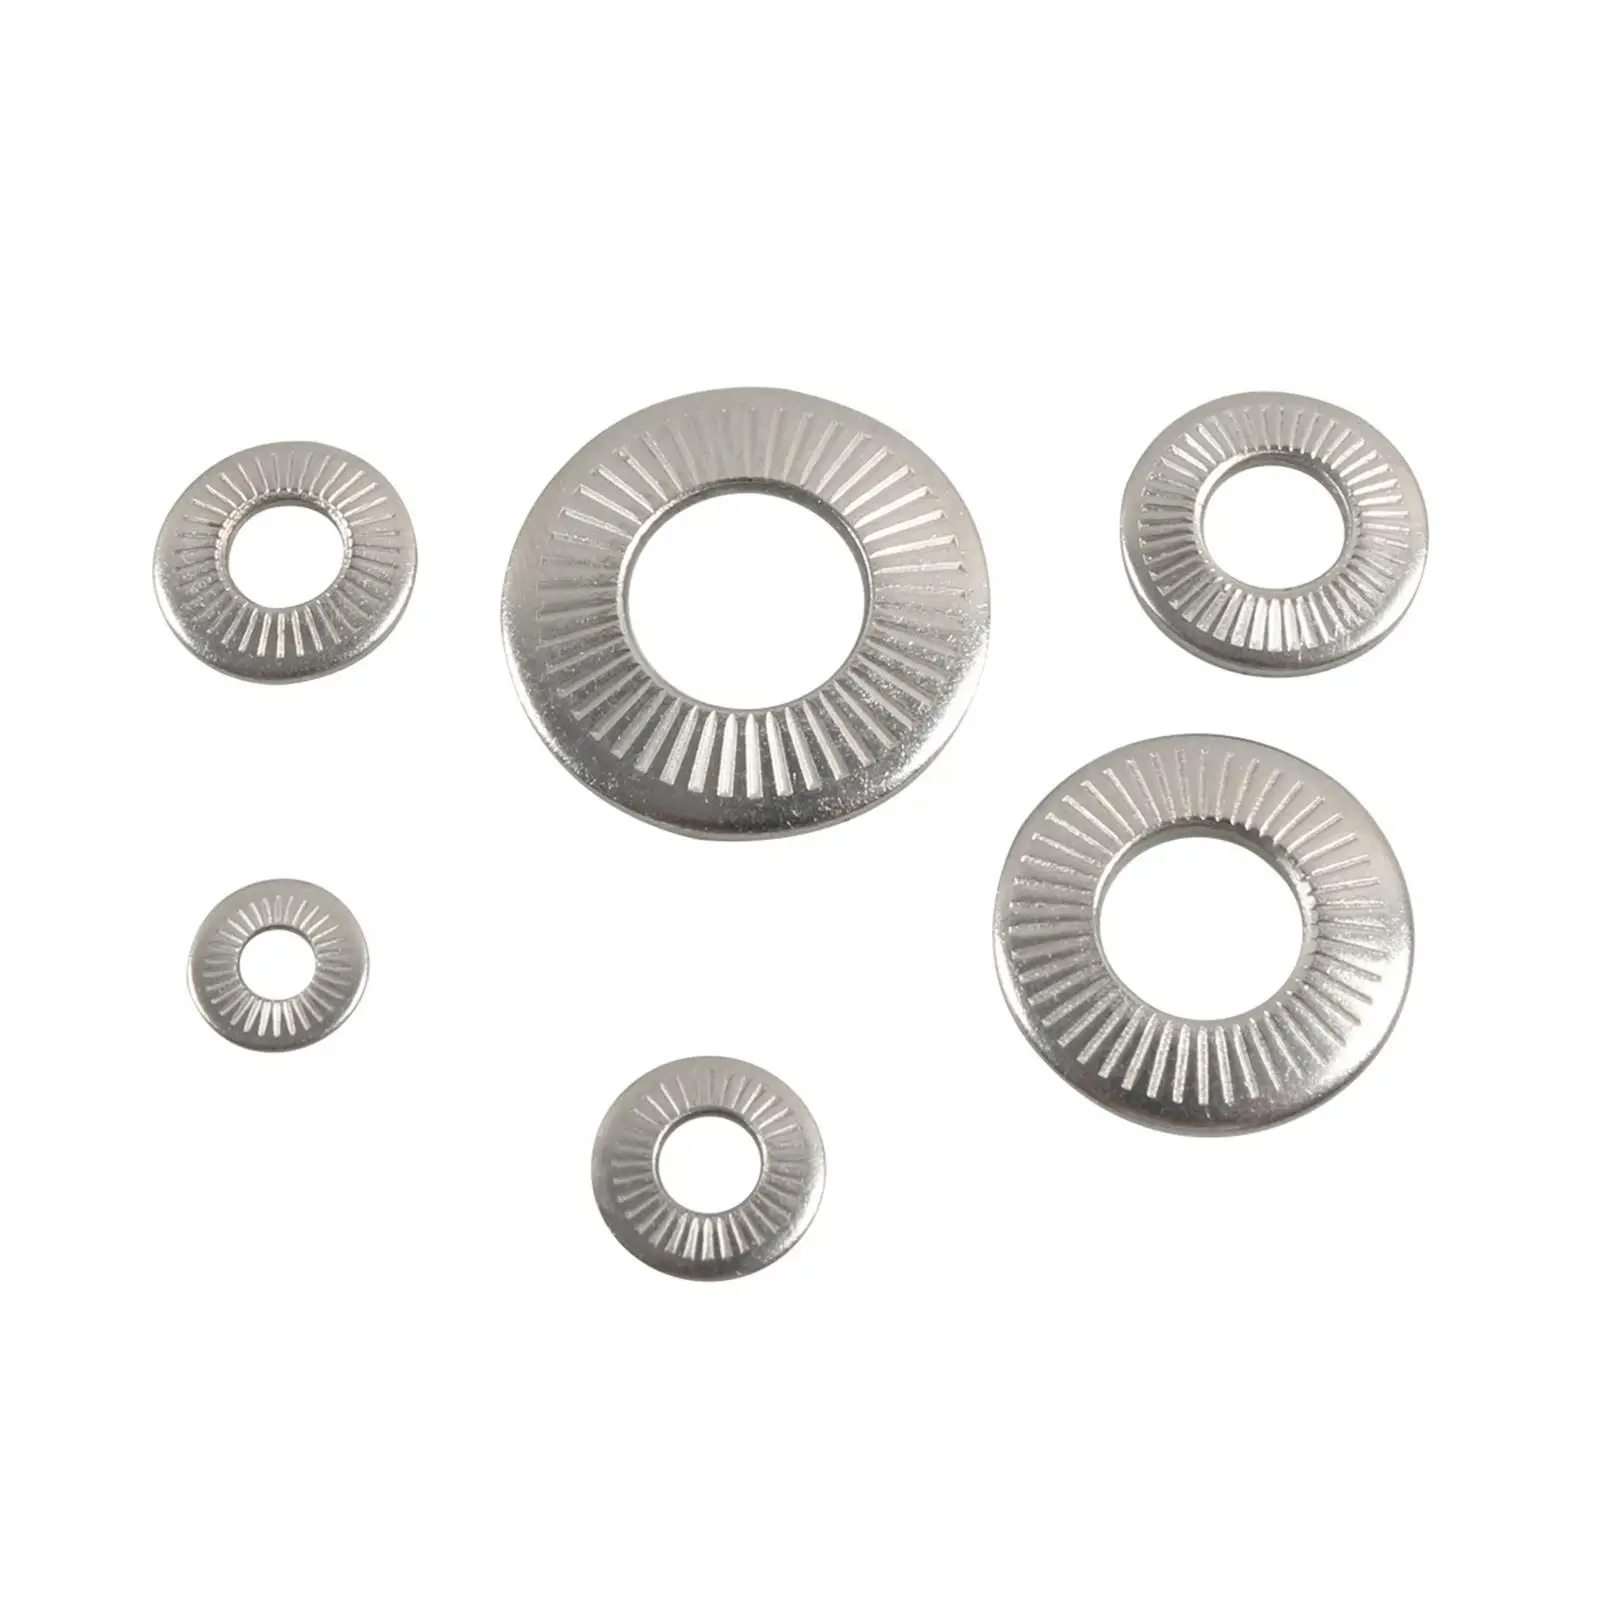 220Pcs Knurled Elastic Gasket 6 Size M3 M4 M5 M6 M8 M10 Serrated Conical Spring Washer for Industrial and Mechanical Electronics